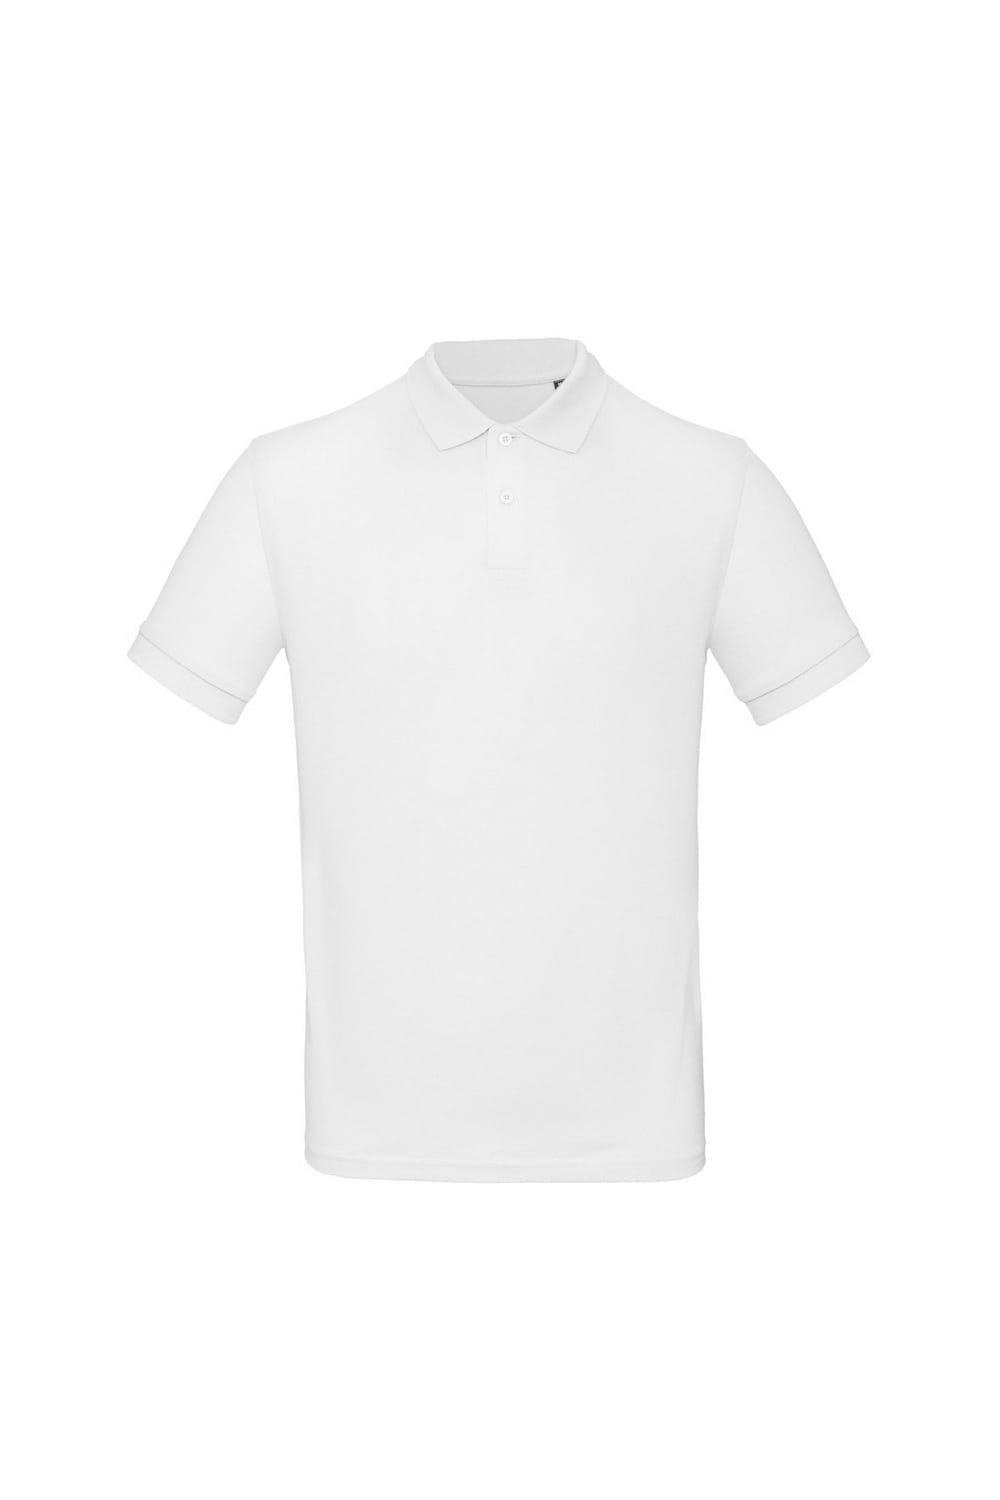 B&C Mens Inspire Polo (Pack of 2) (Snow)